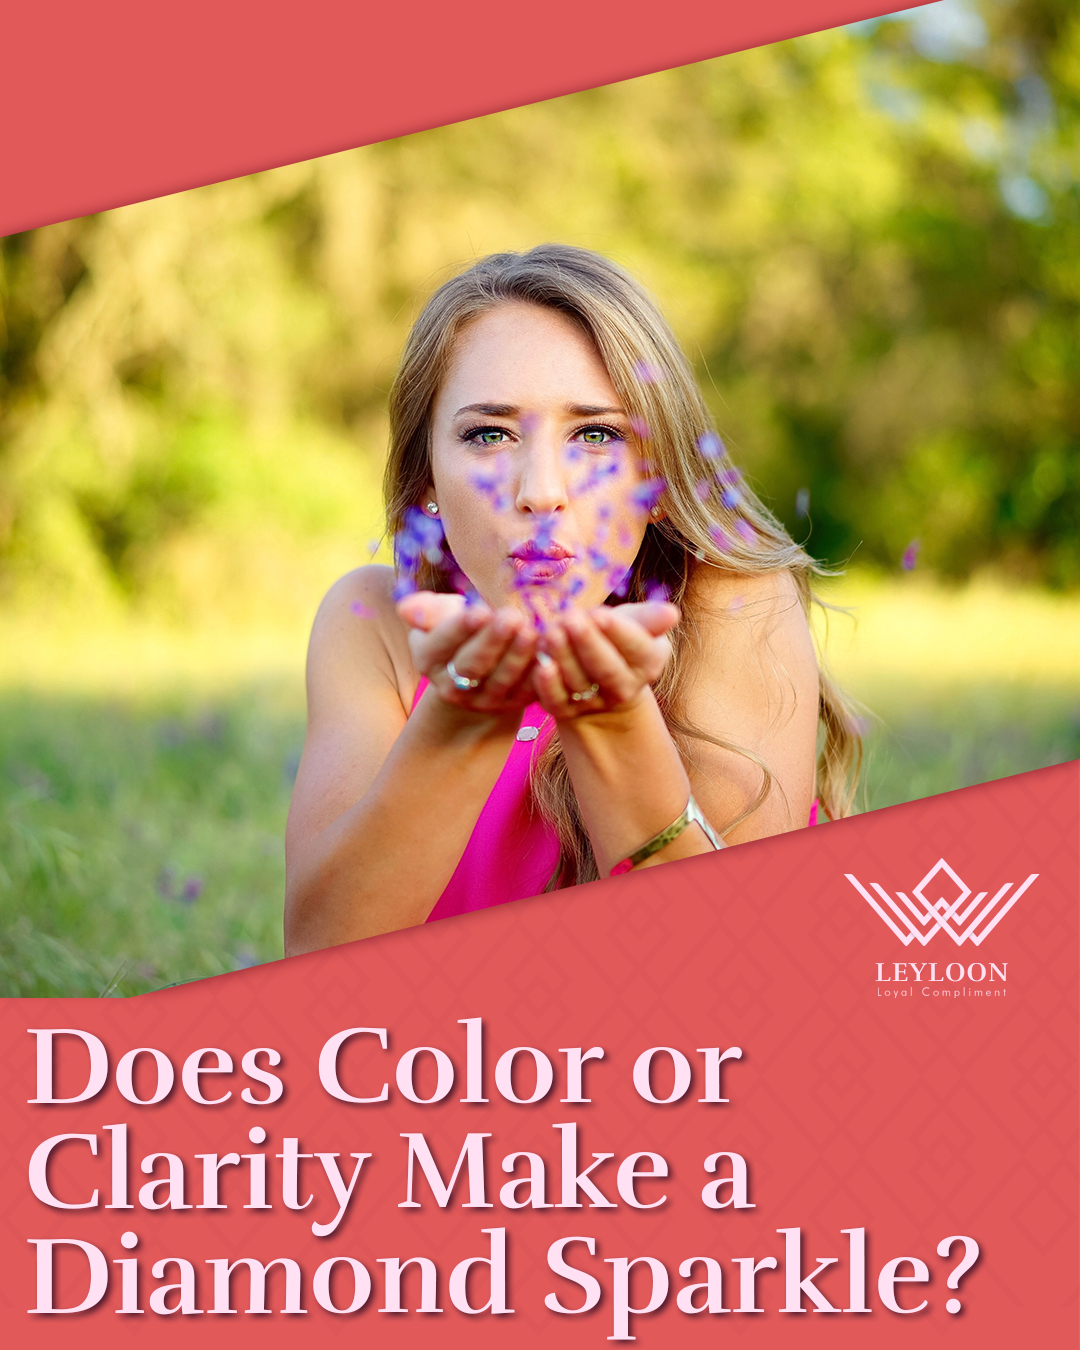 Does Color or Clarity Make a Diamond Sparkle?